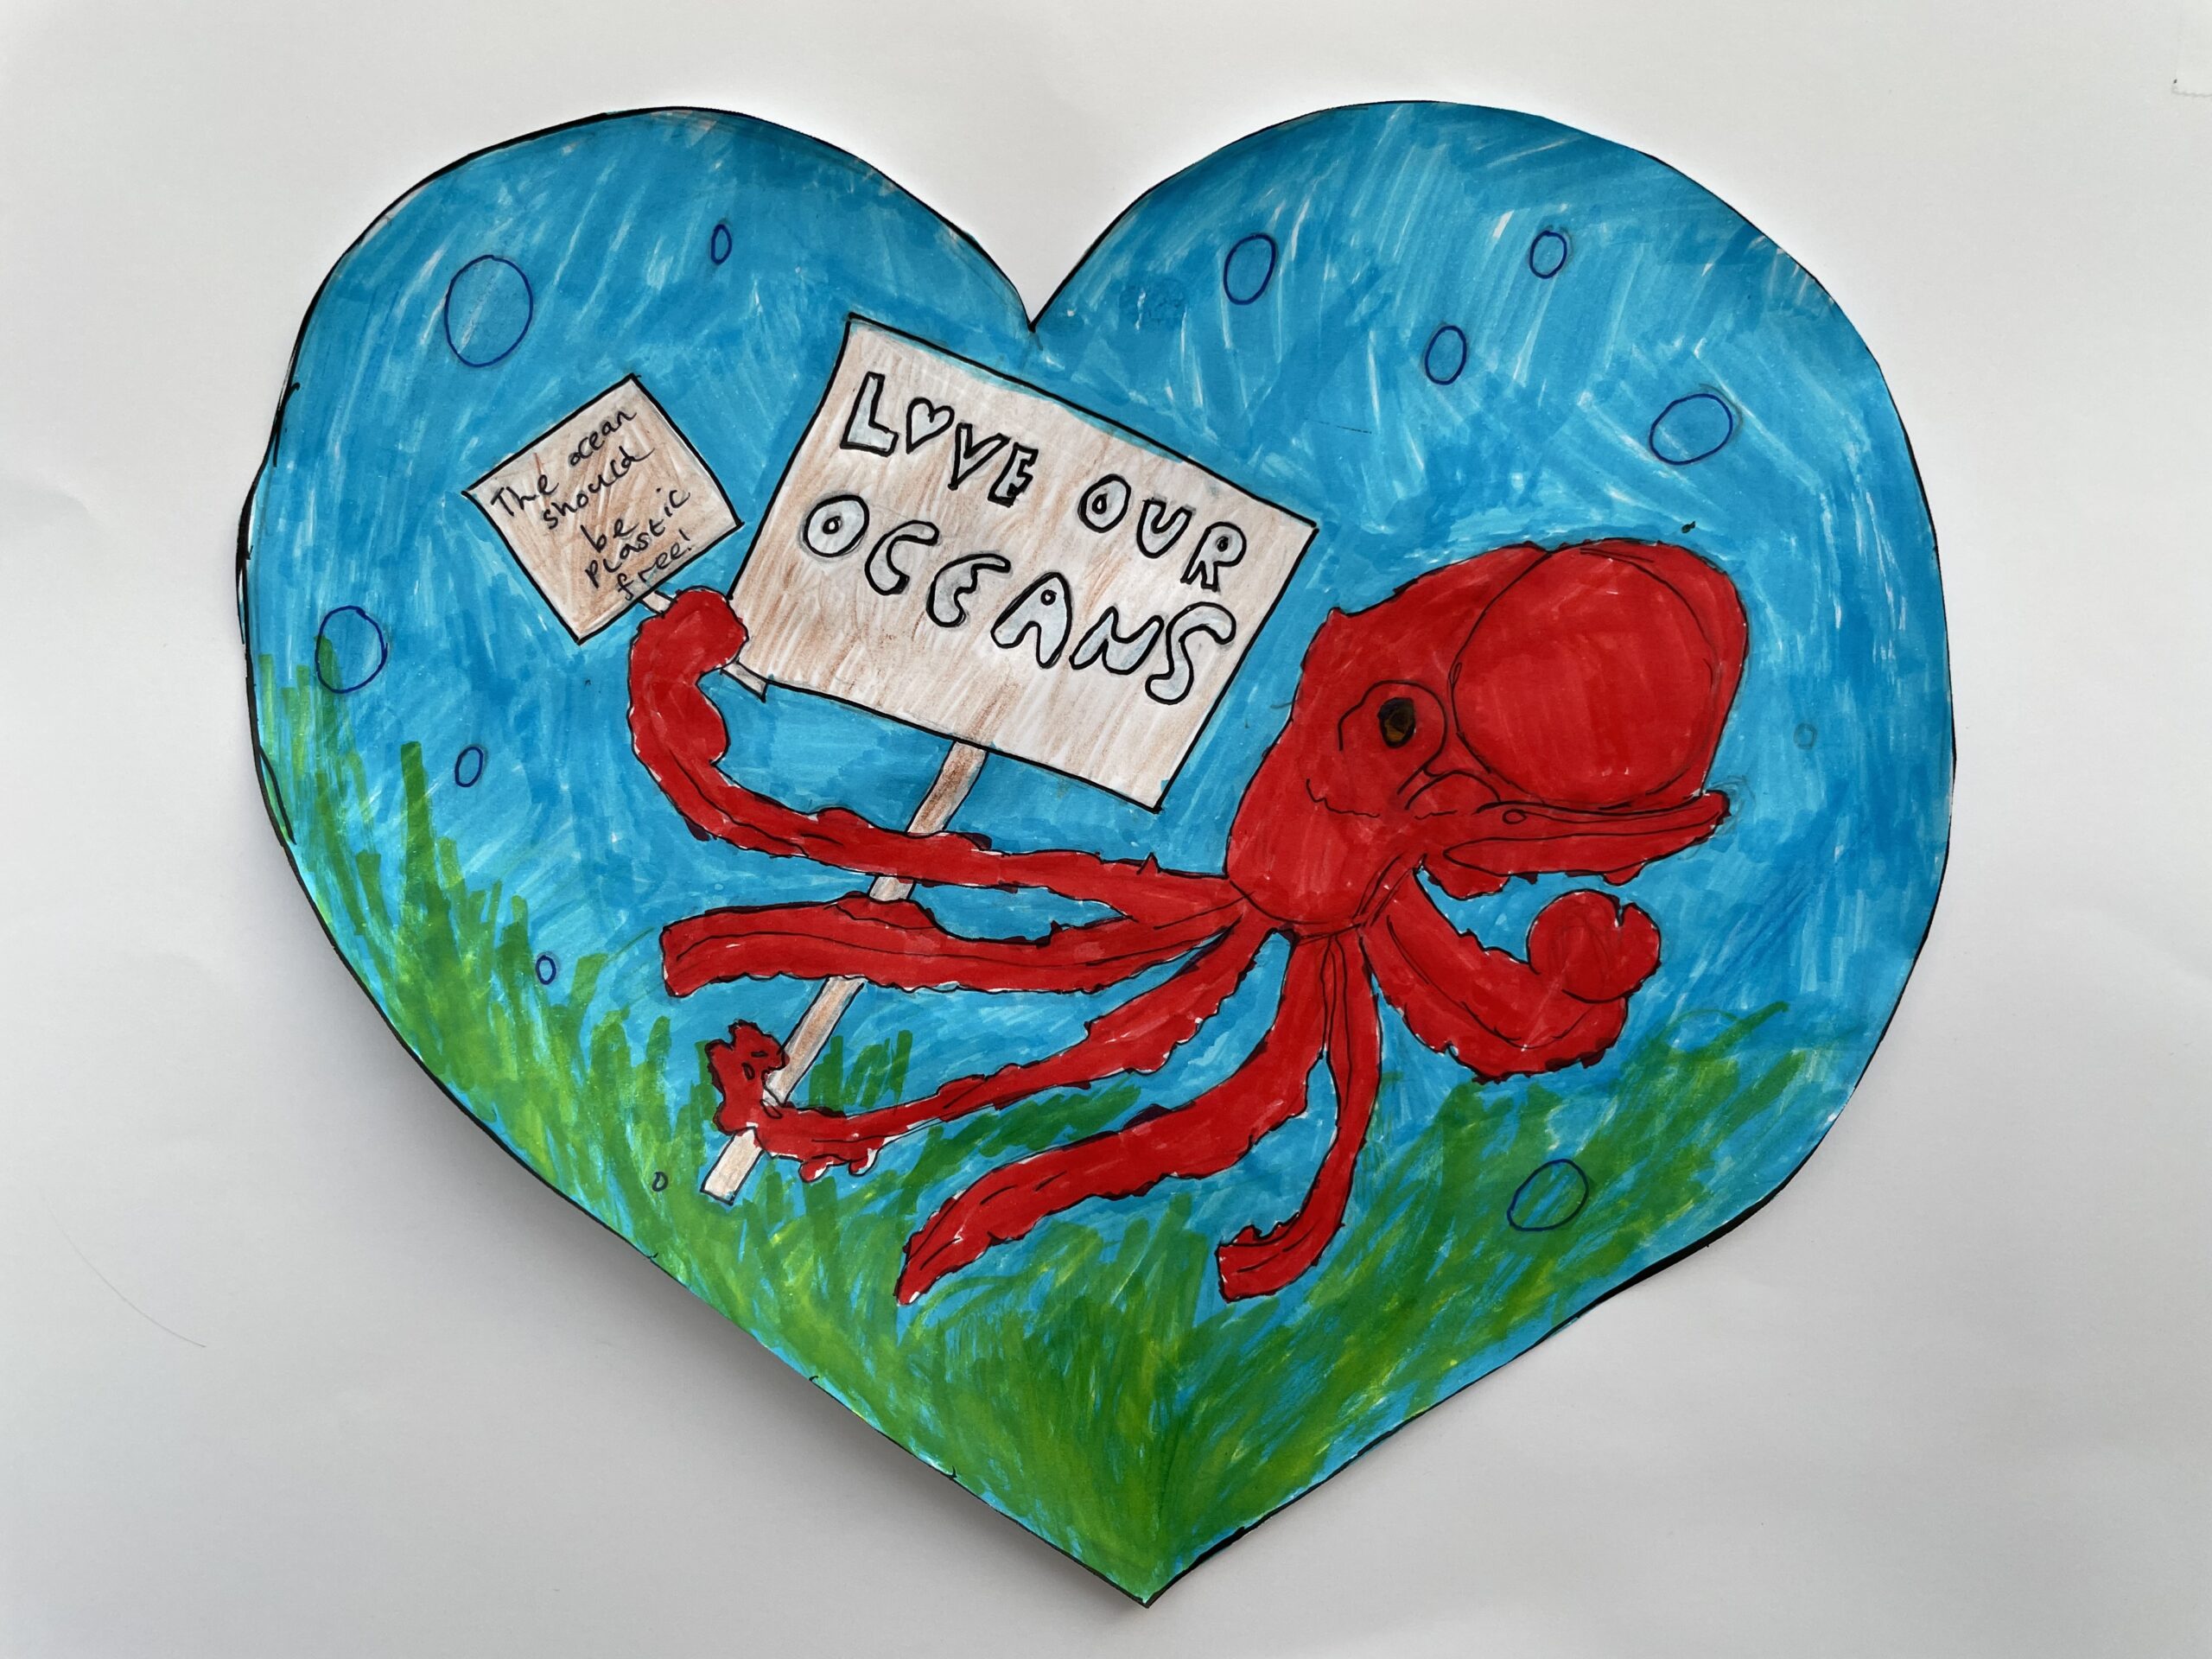 Child's felt pen drawing shows a red octopus holding up a placard that reads 'Love our oceans'.